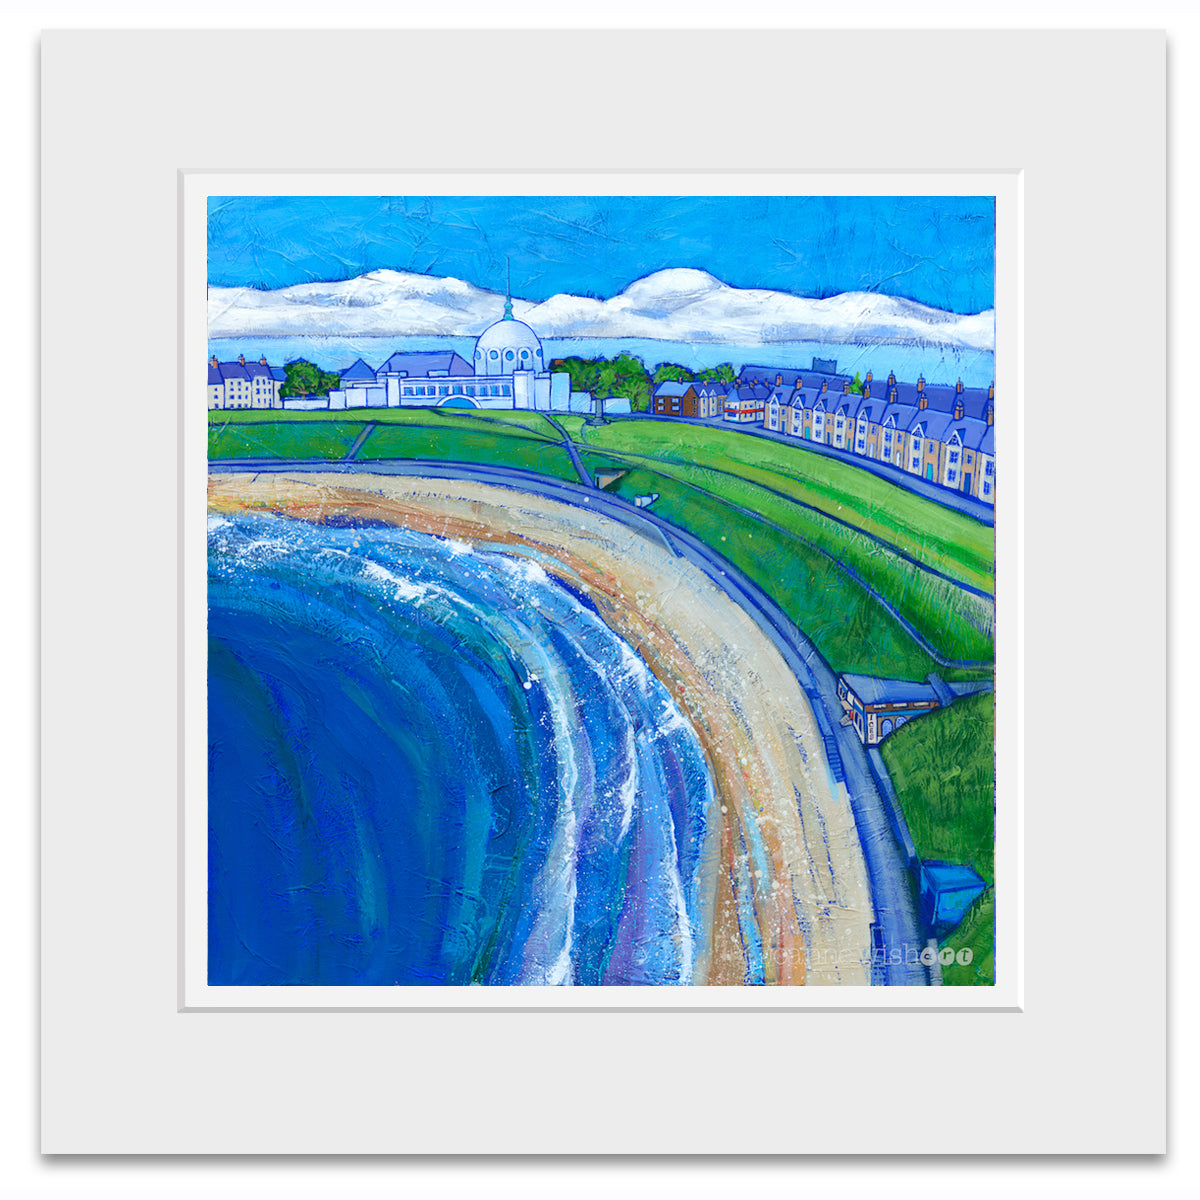 A mounted print of Whitley Bay dome and beach.